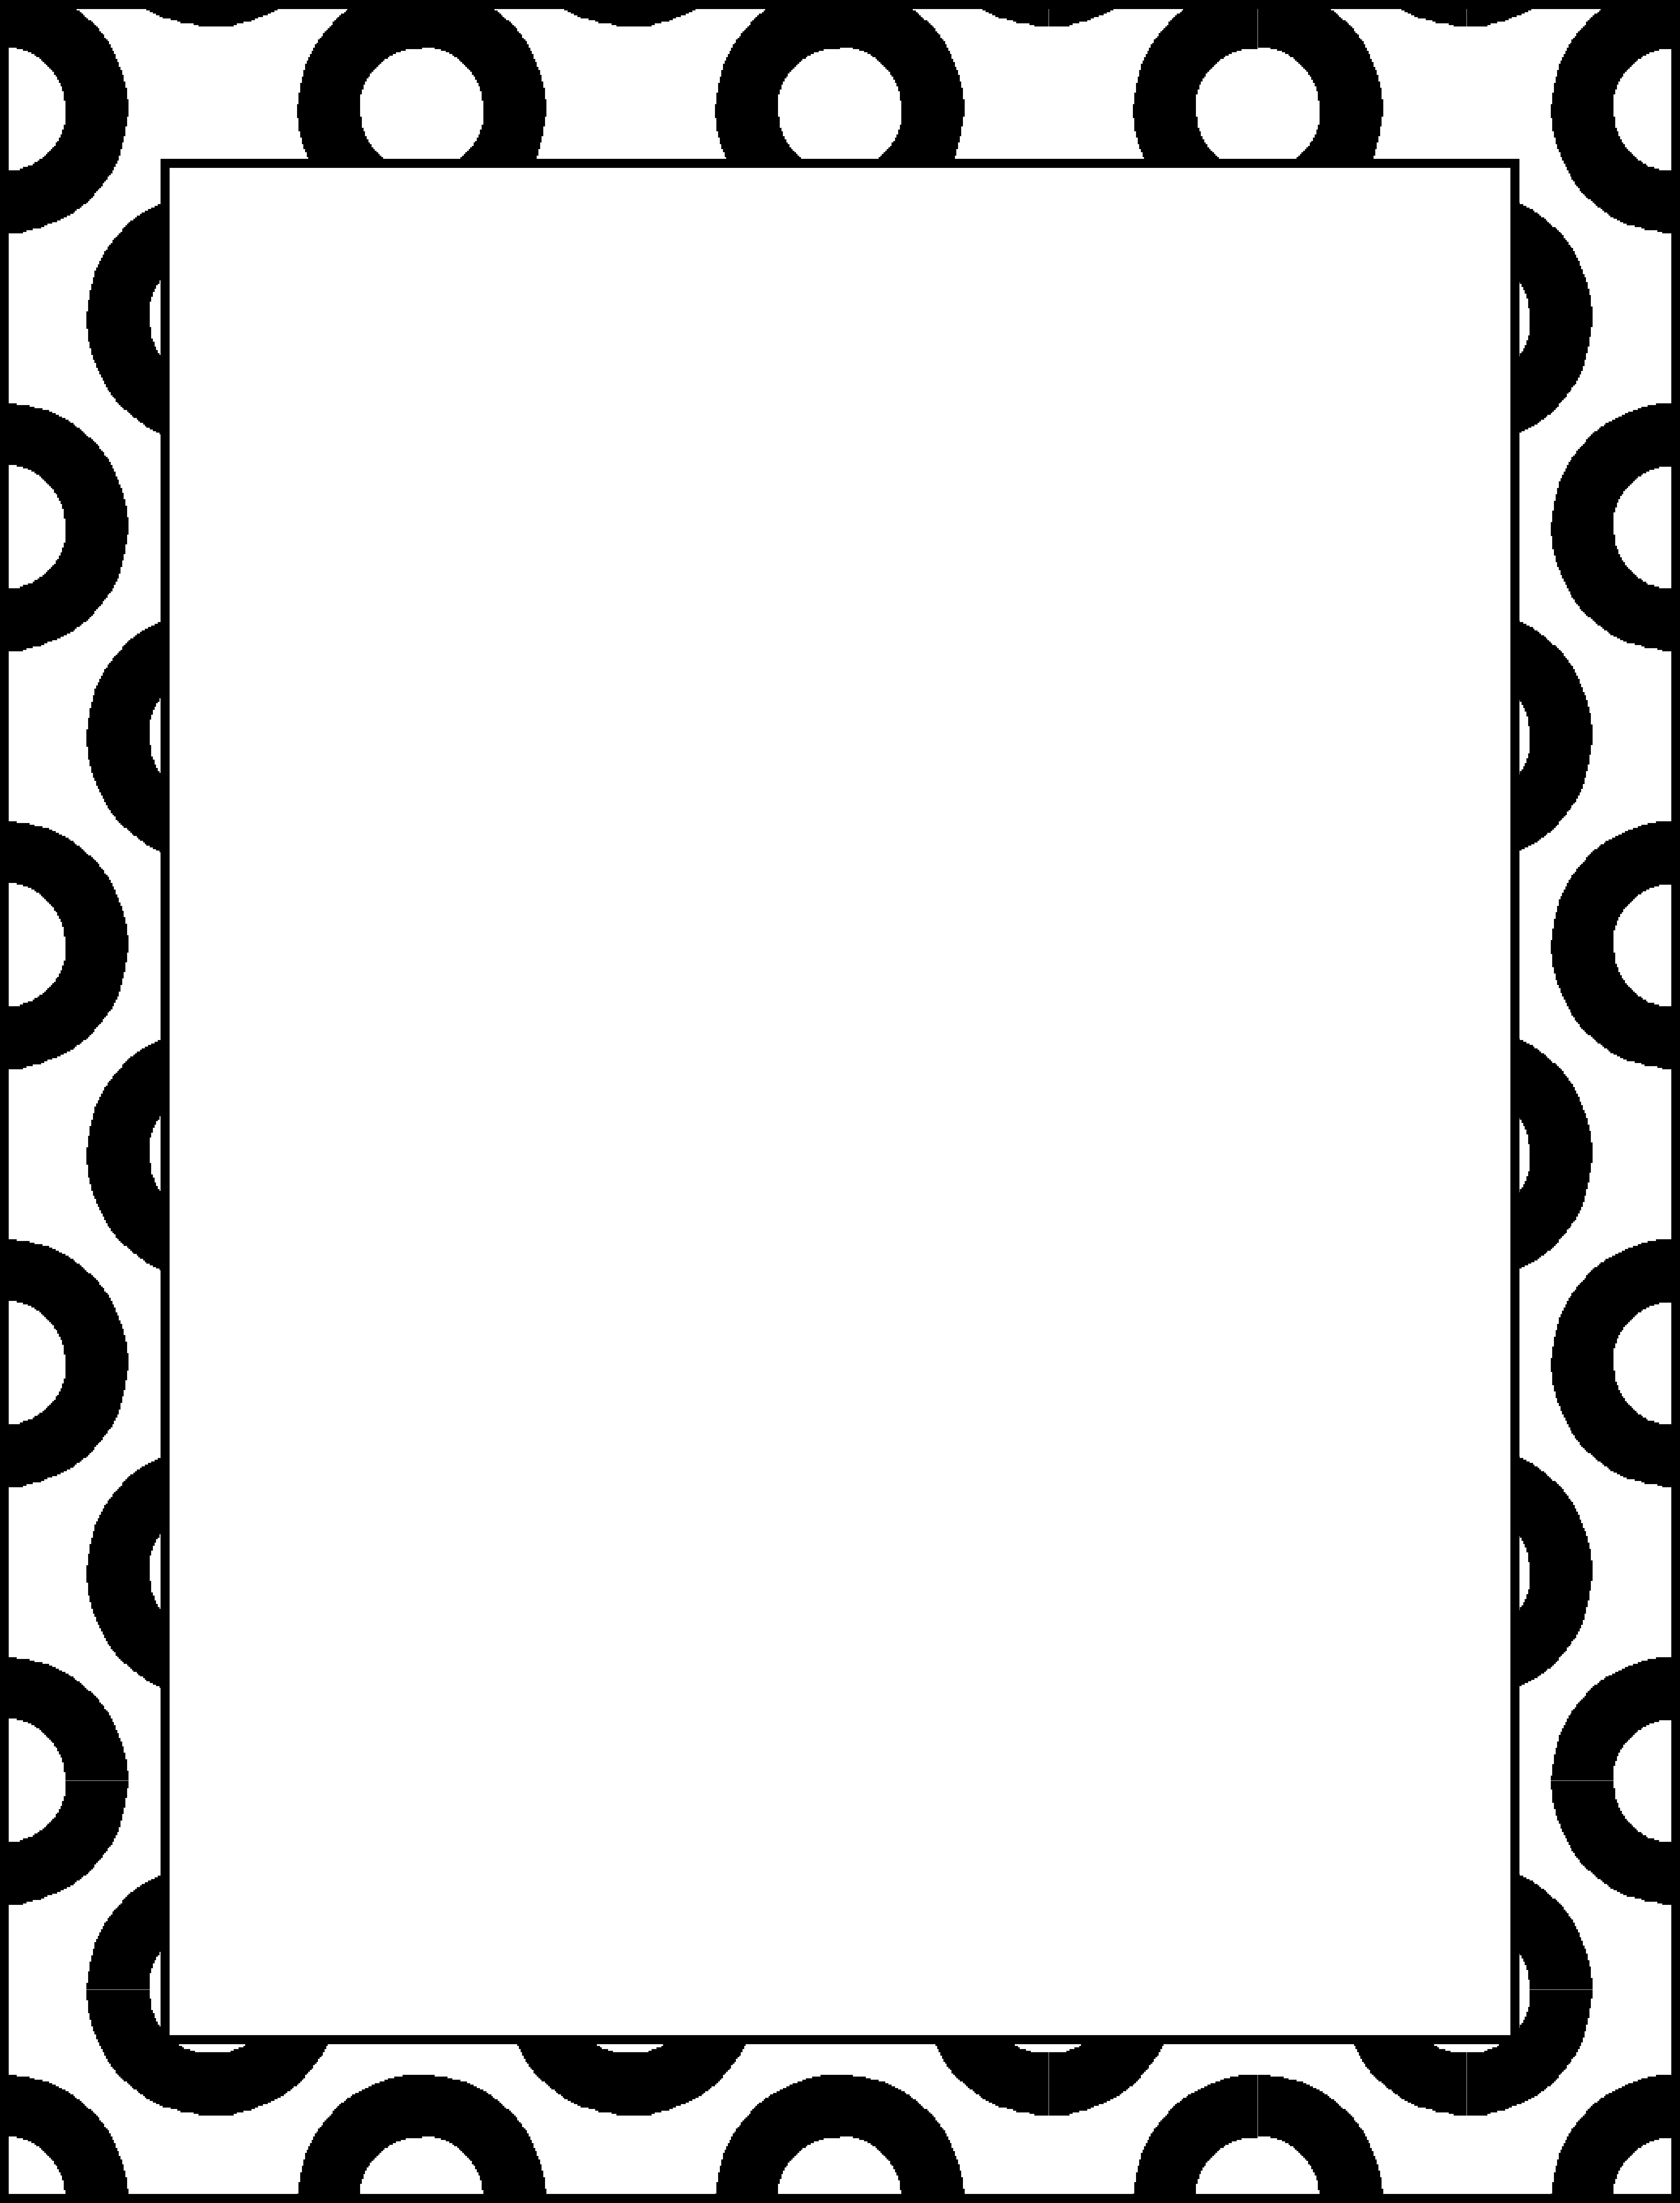 simple-border-designs-for-school-projects-to-draw-cliparts-co